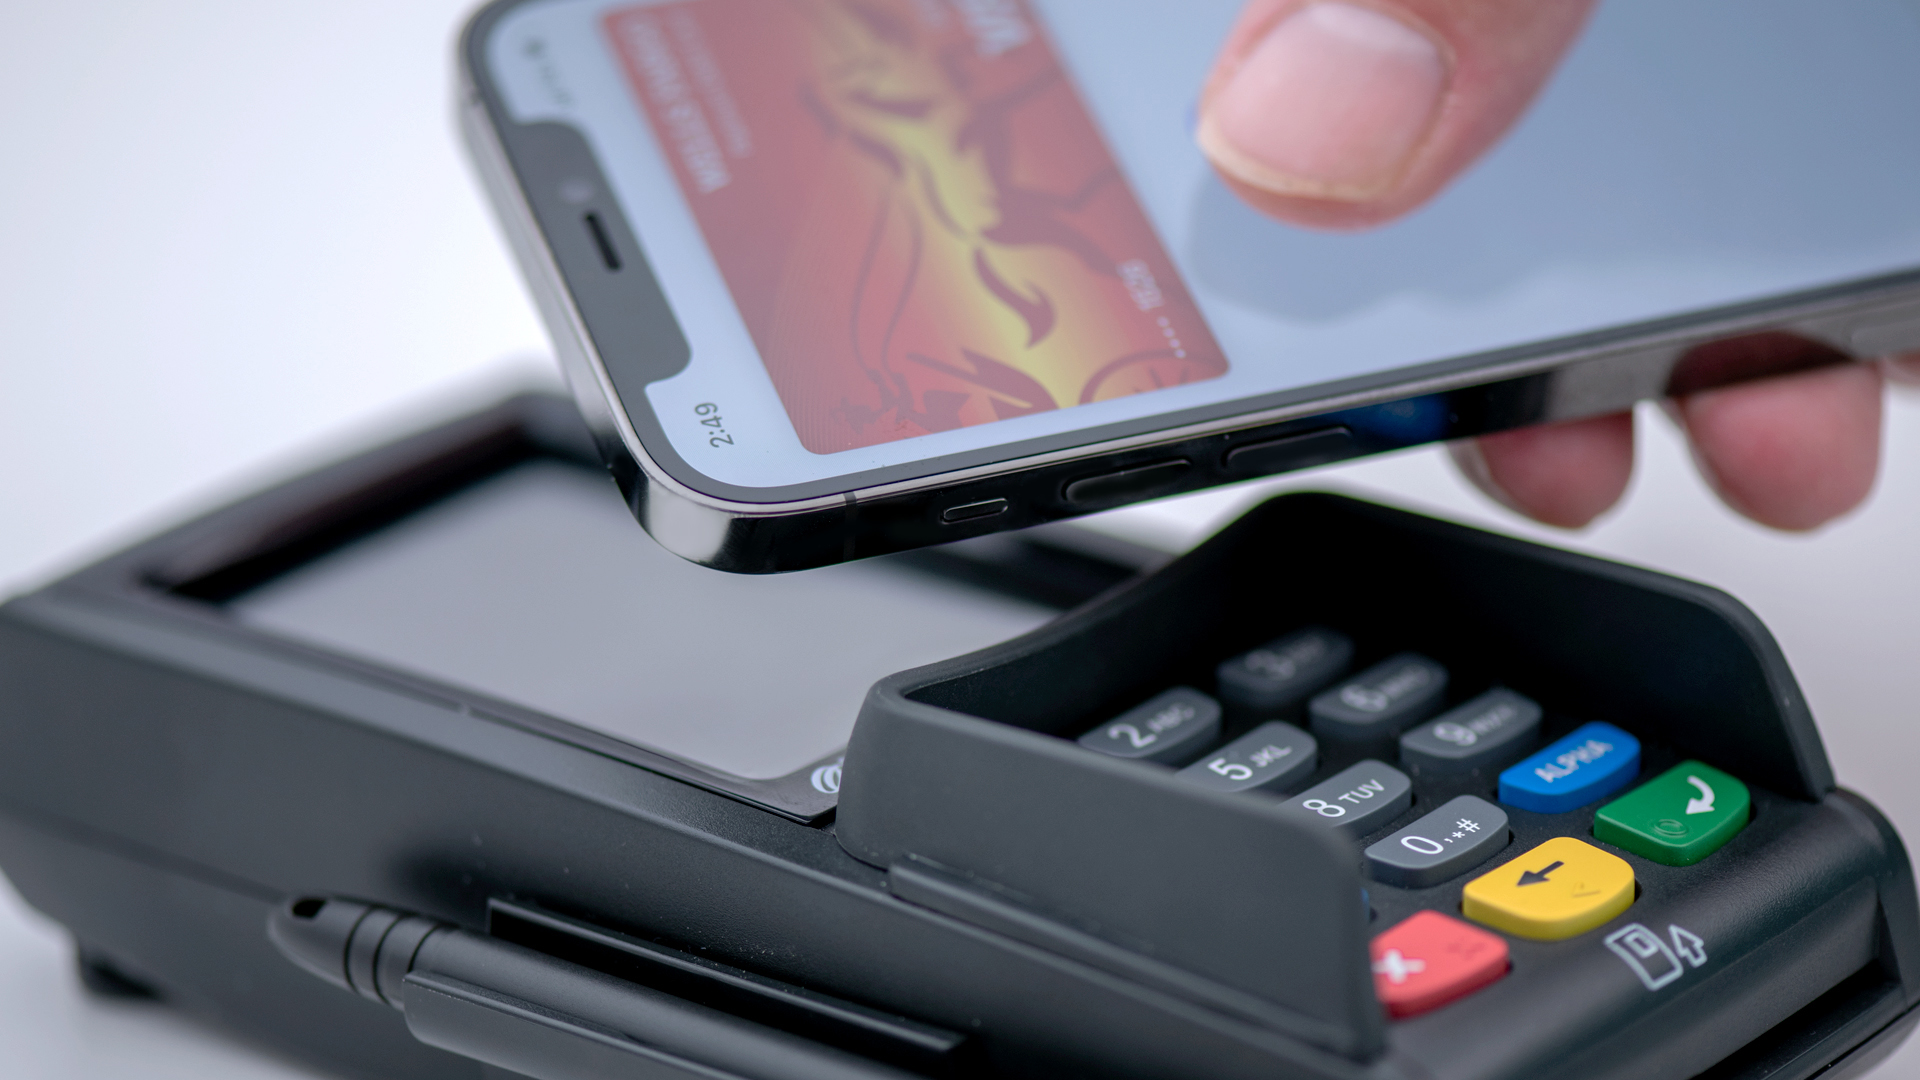 General Surgery Billing & Coding Software|Credit Card Processing with apple pay | AdvancedMD